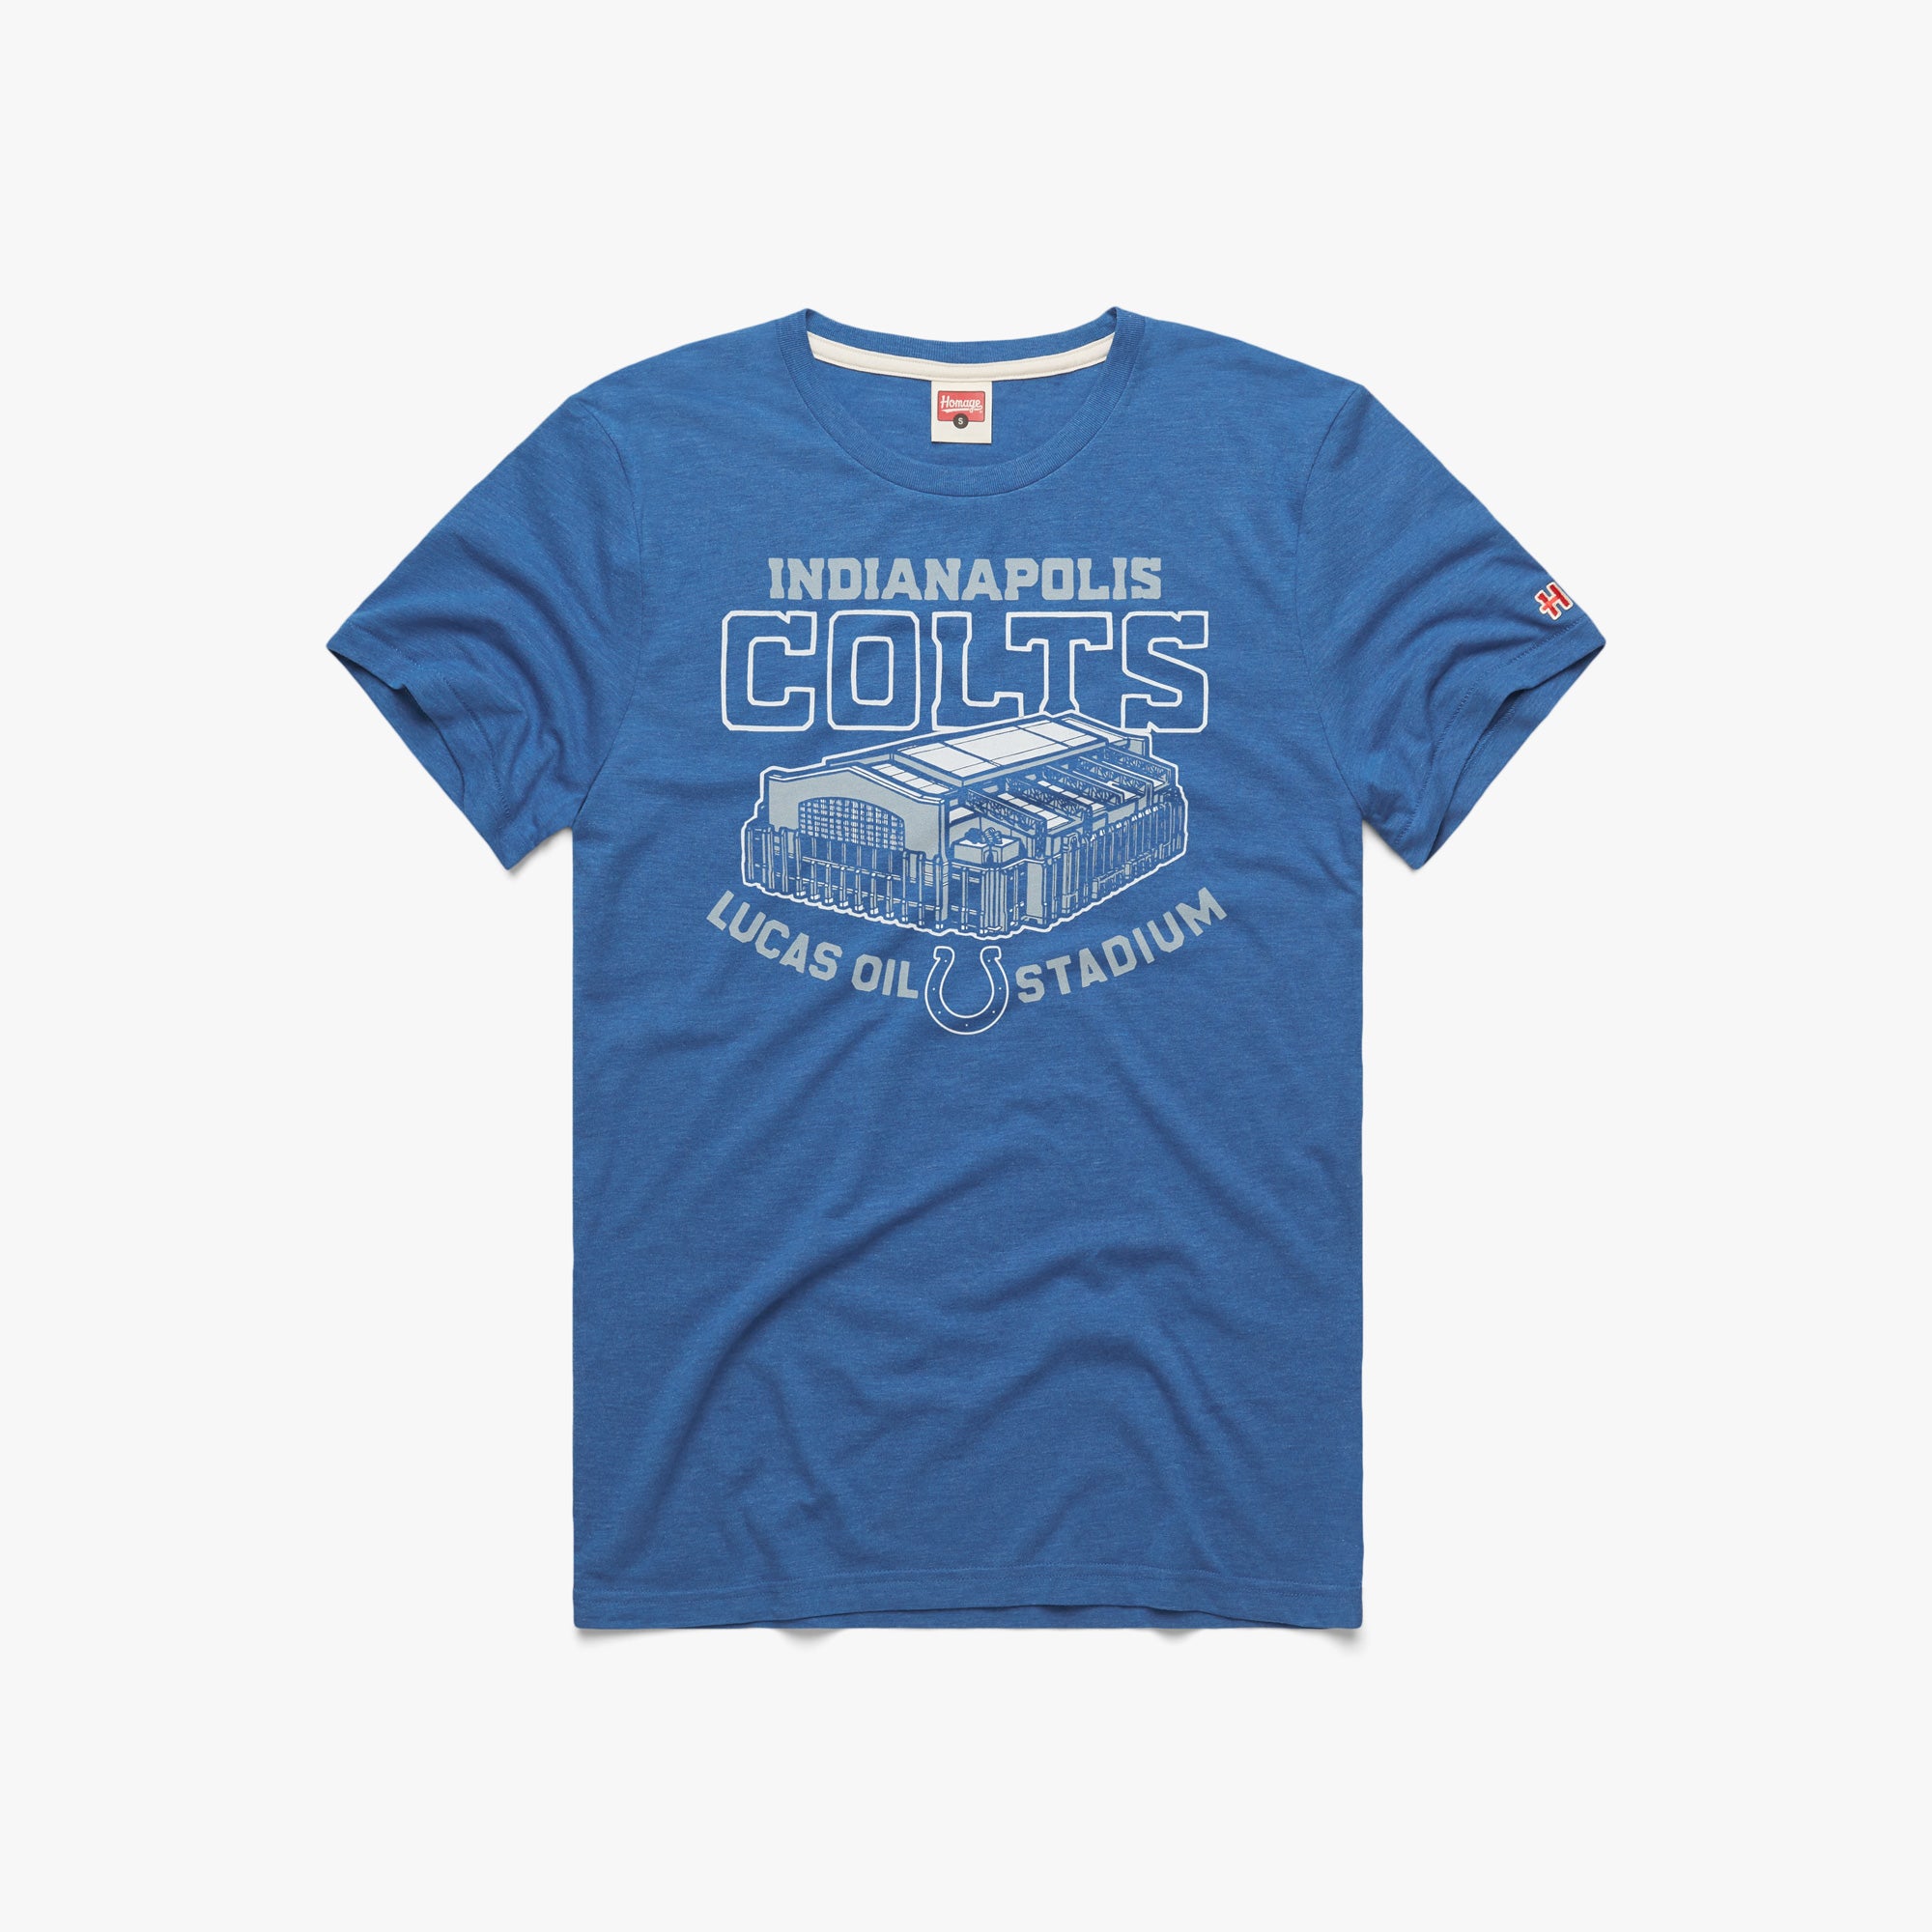 Indianapolis Colts Lucas Oil Stadium T-Shirt from Homage. | Officially Licensed Vintage NFL Apparel from Homage Pro Shop.